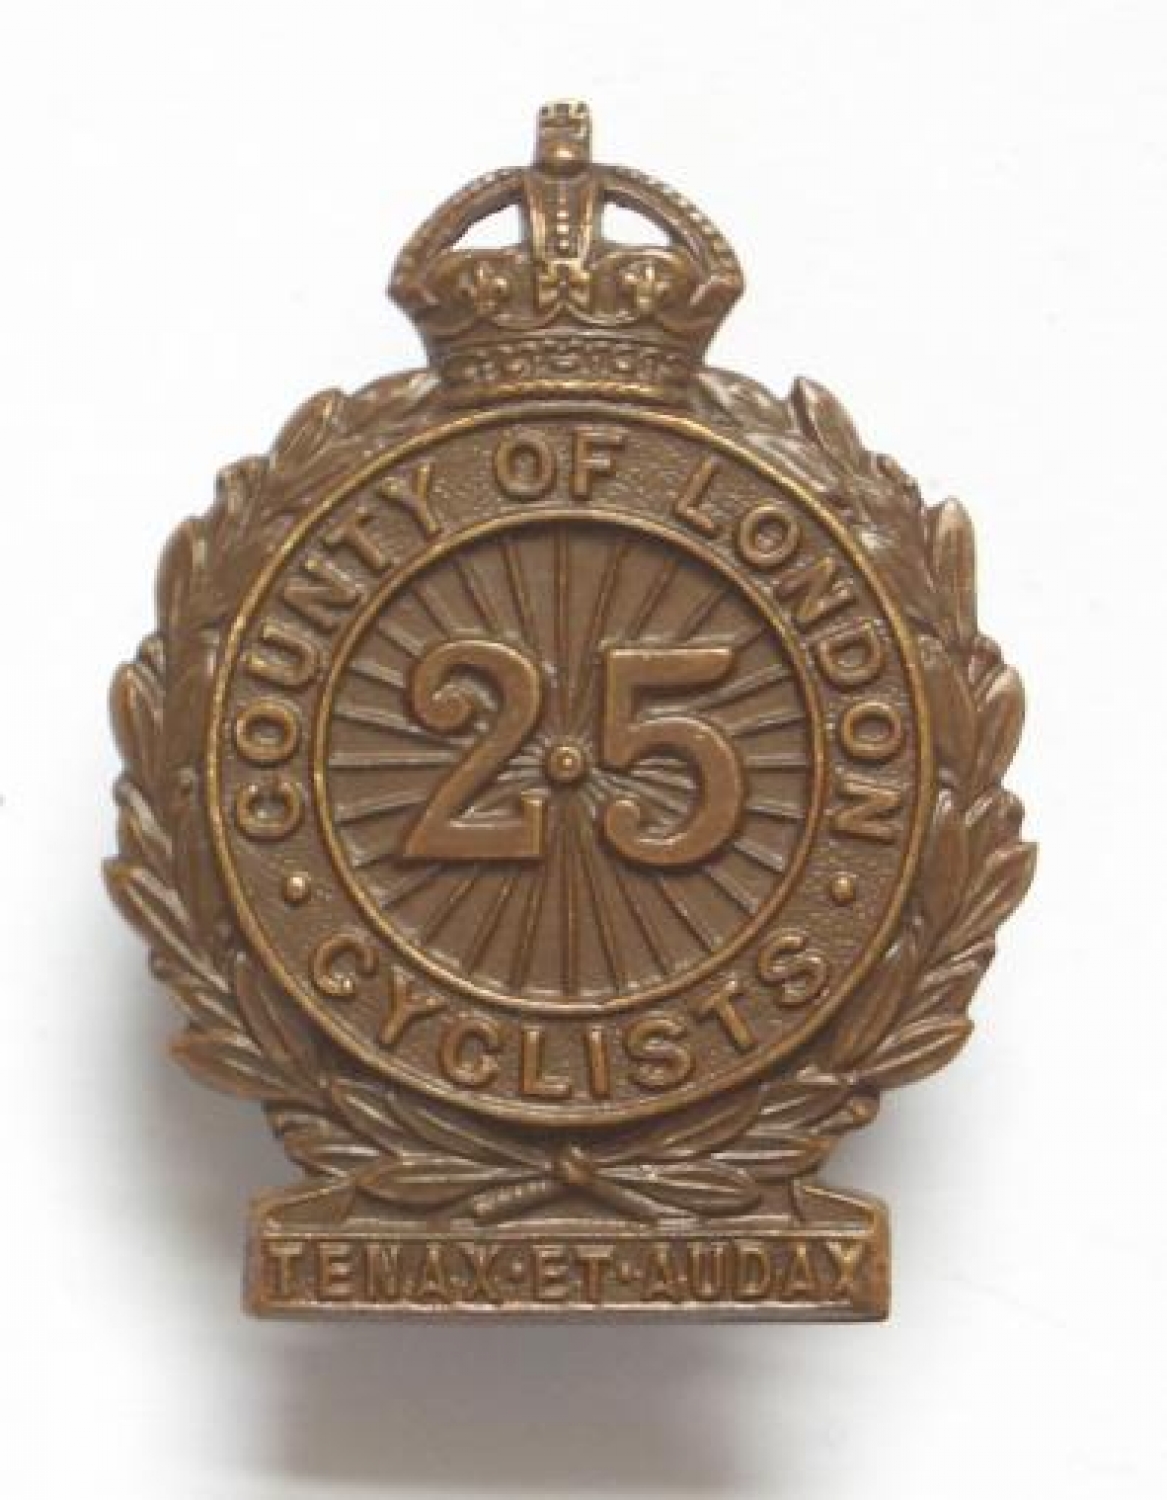 25th County of London Cyclists cap badge